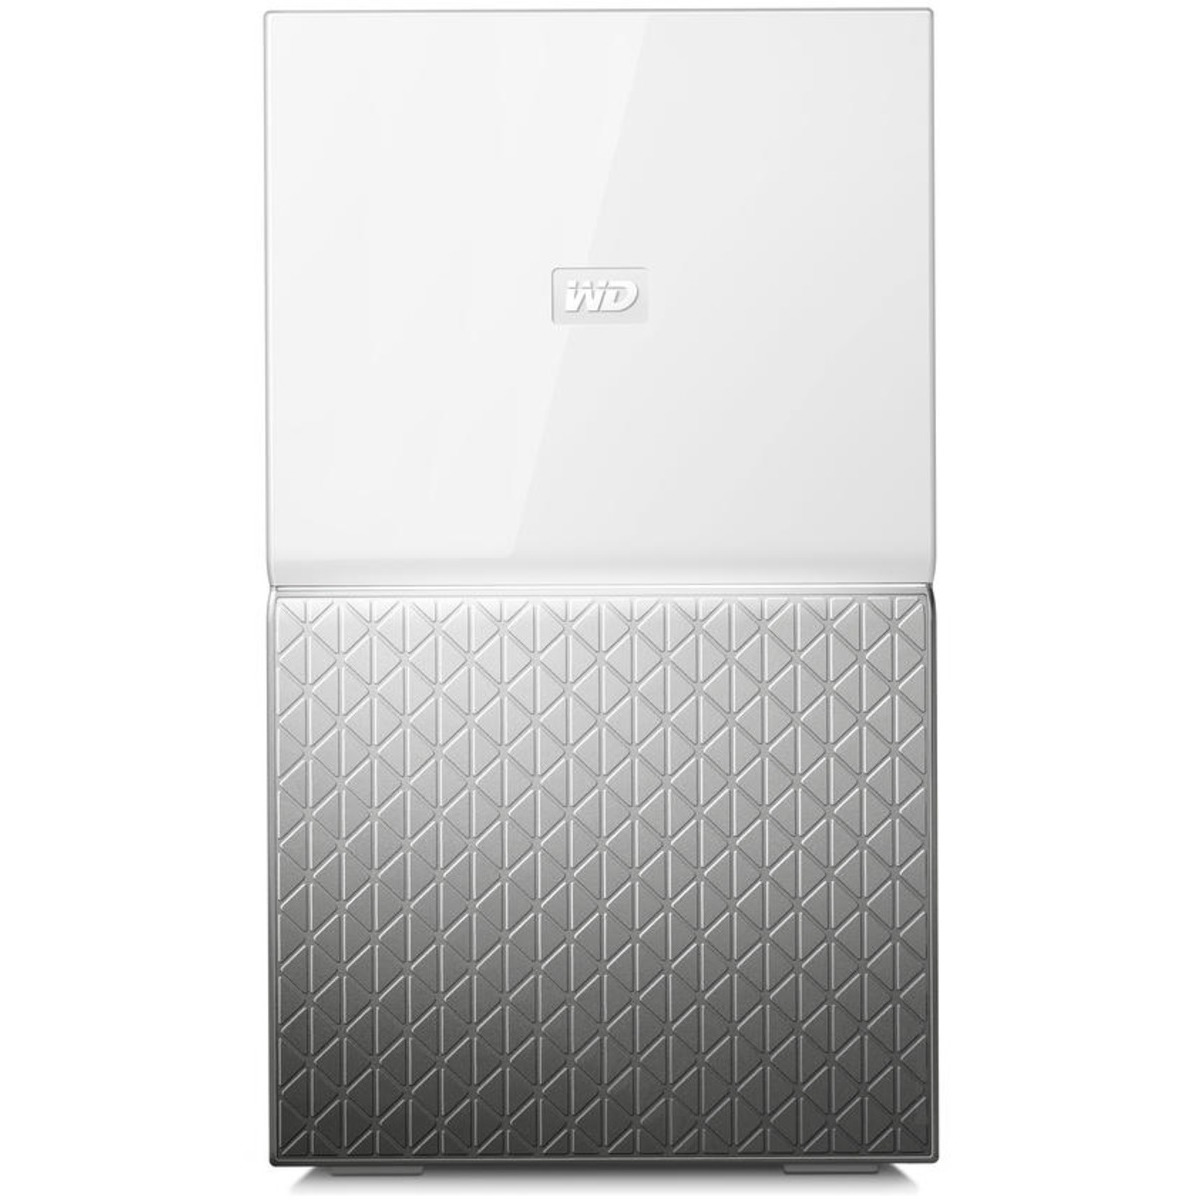 Western Digital My Cloud Home Duo 36tb 2-Bay Desktop Personal / Basic Home / Small Office DAS - Direct Attached Storage Device 2x18tb Western Digital Red Pro WD181KFGX 3.5 7200rpm SATA 6Gb/s HDD NAS Class Drives Installed - Burn-In Tested My Cloud Home Duo